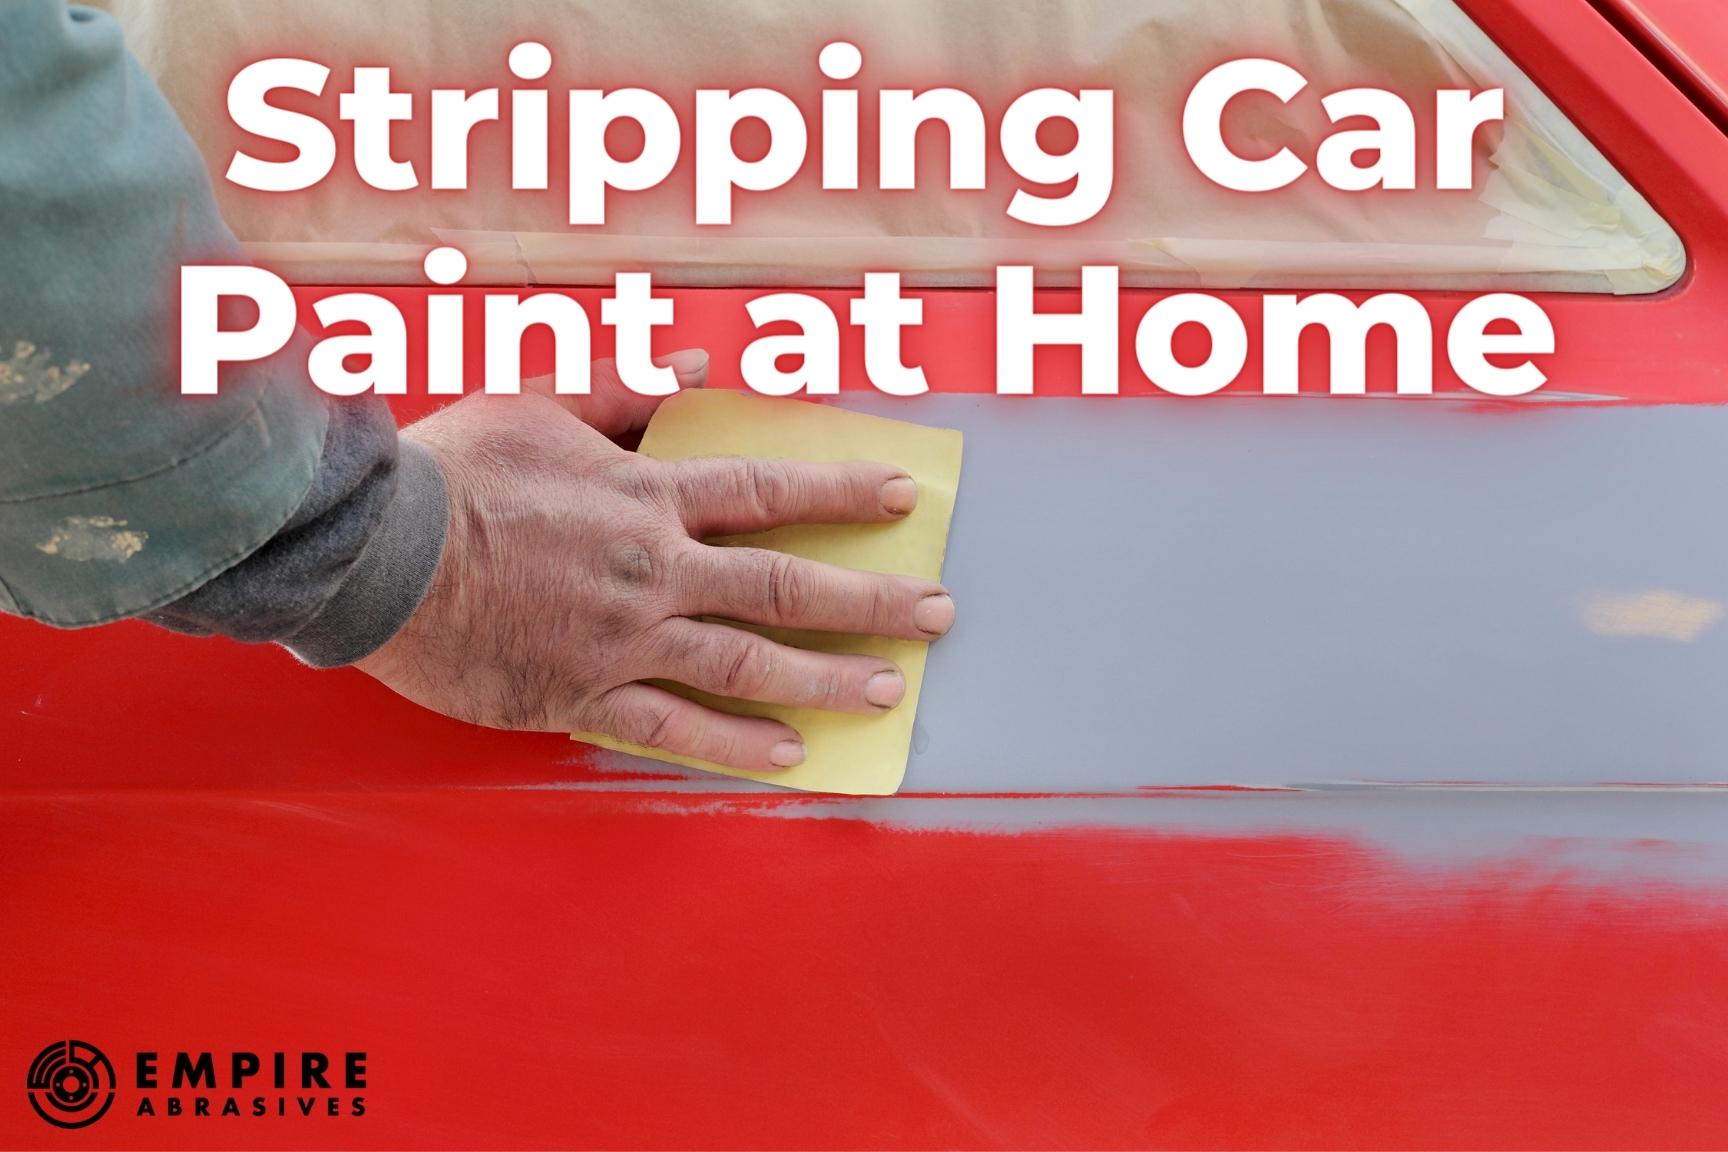 Removing car paint with abrasive products